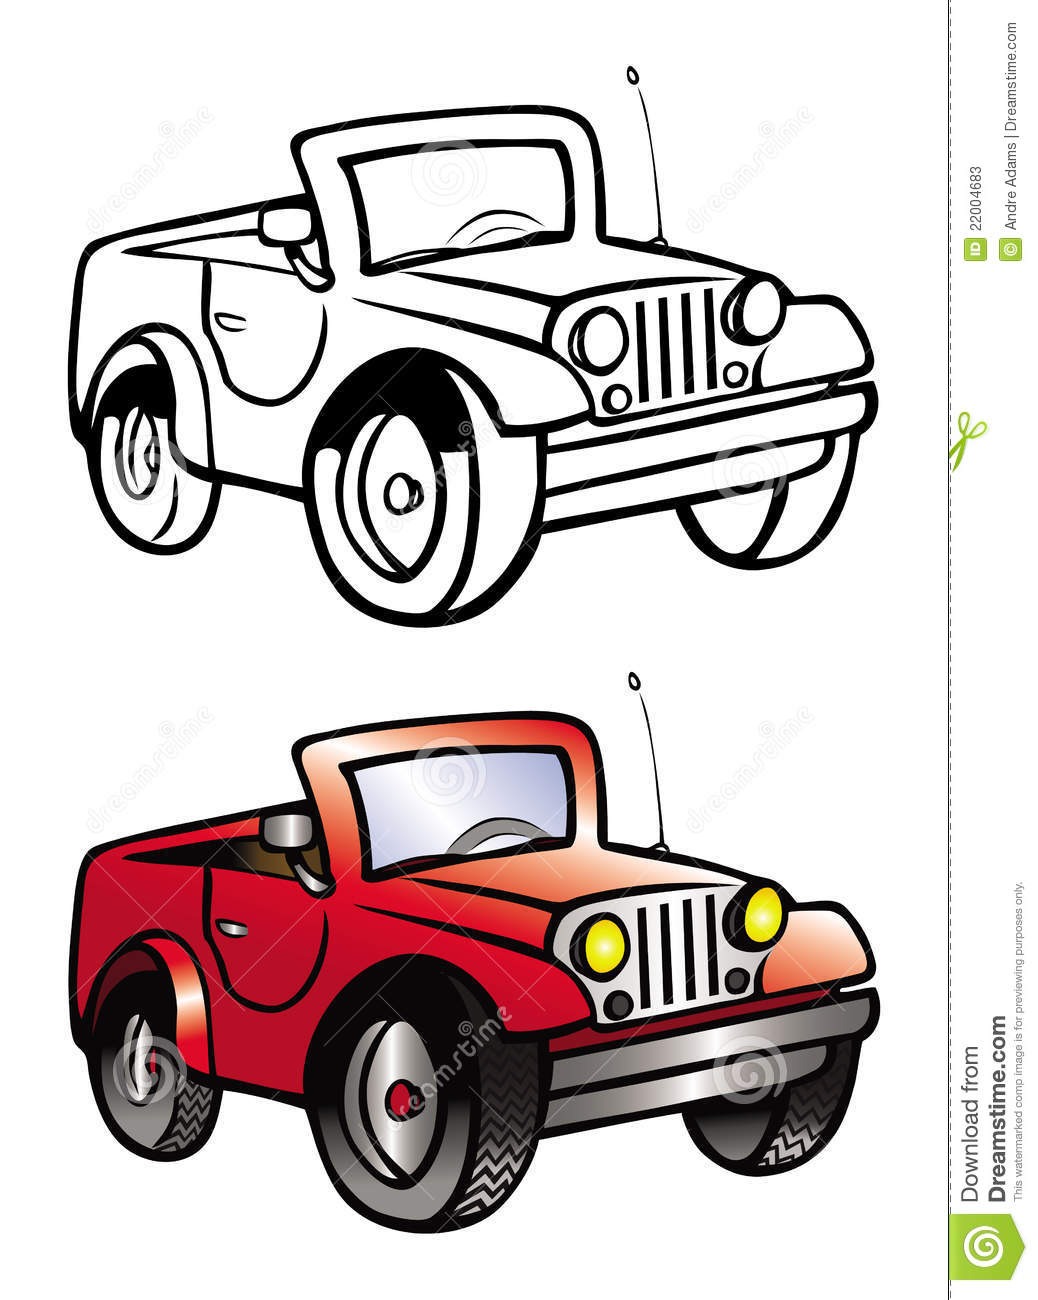 Jeep Clipart Black And White   Clipart Panda   Free Clipart Images